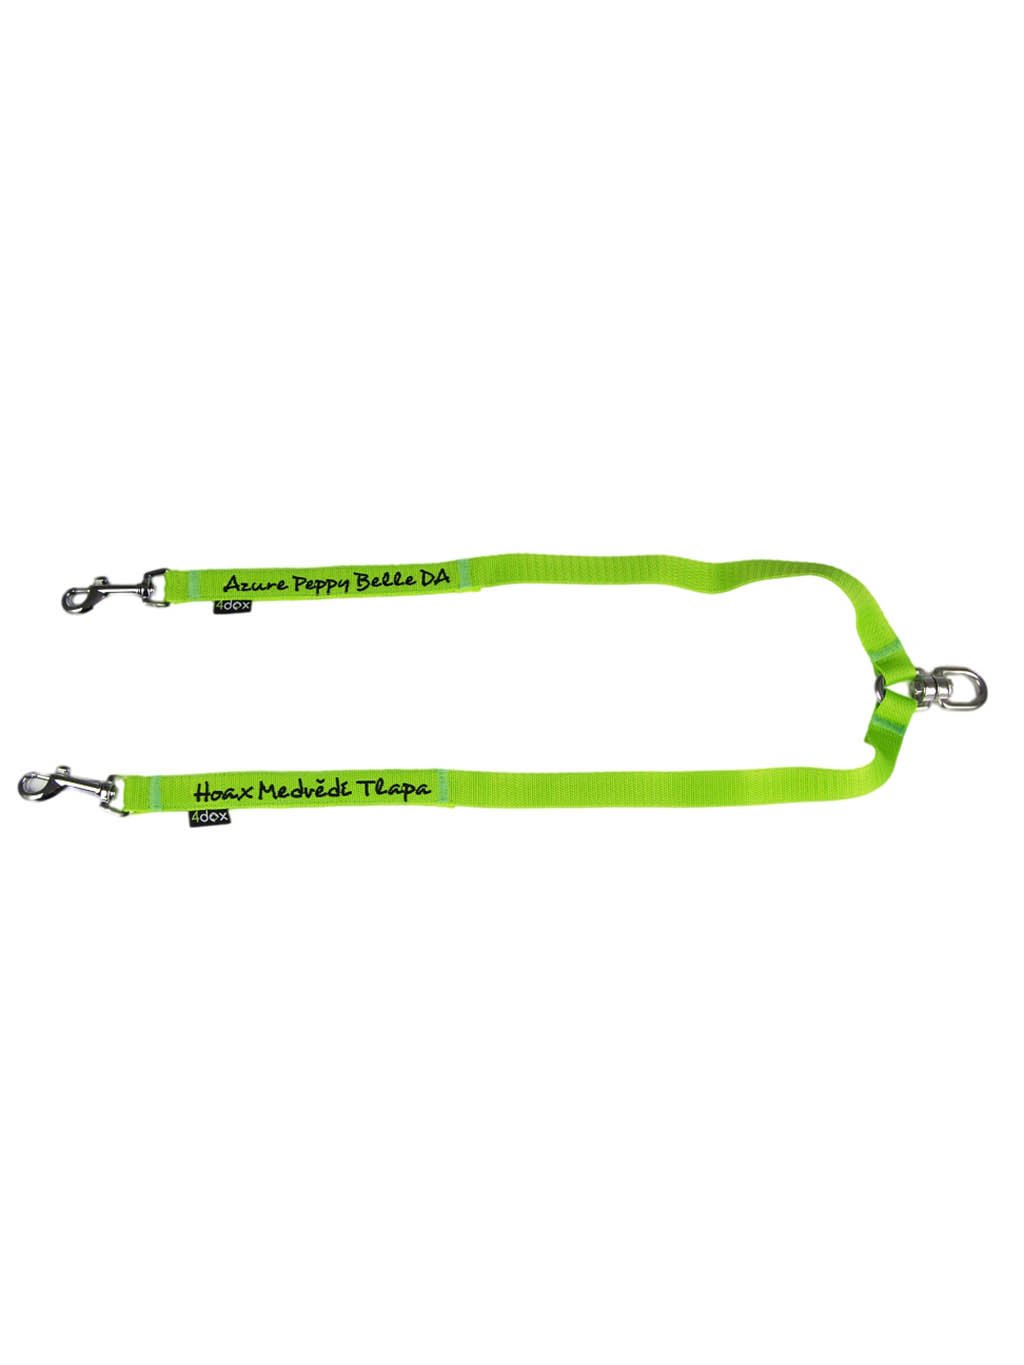 Split for two dogs - customized leash